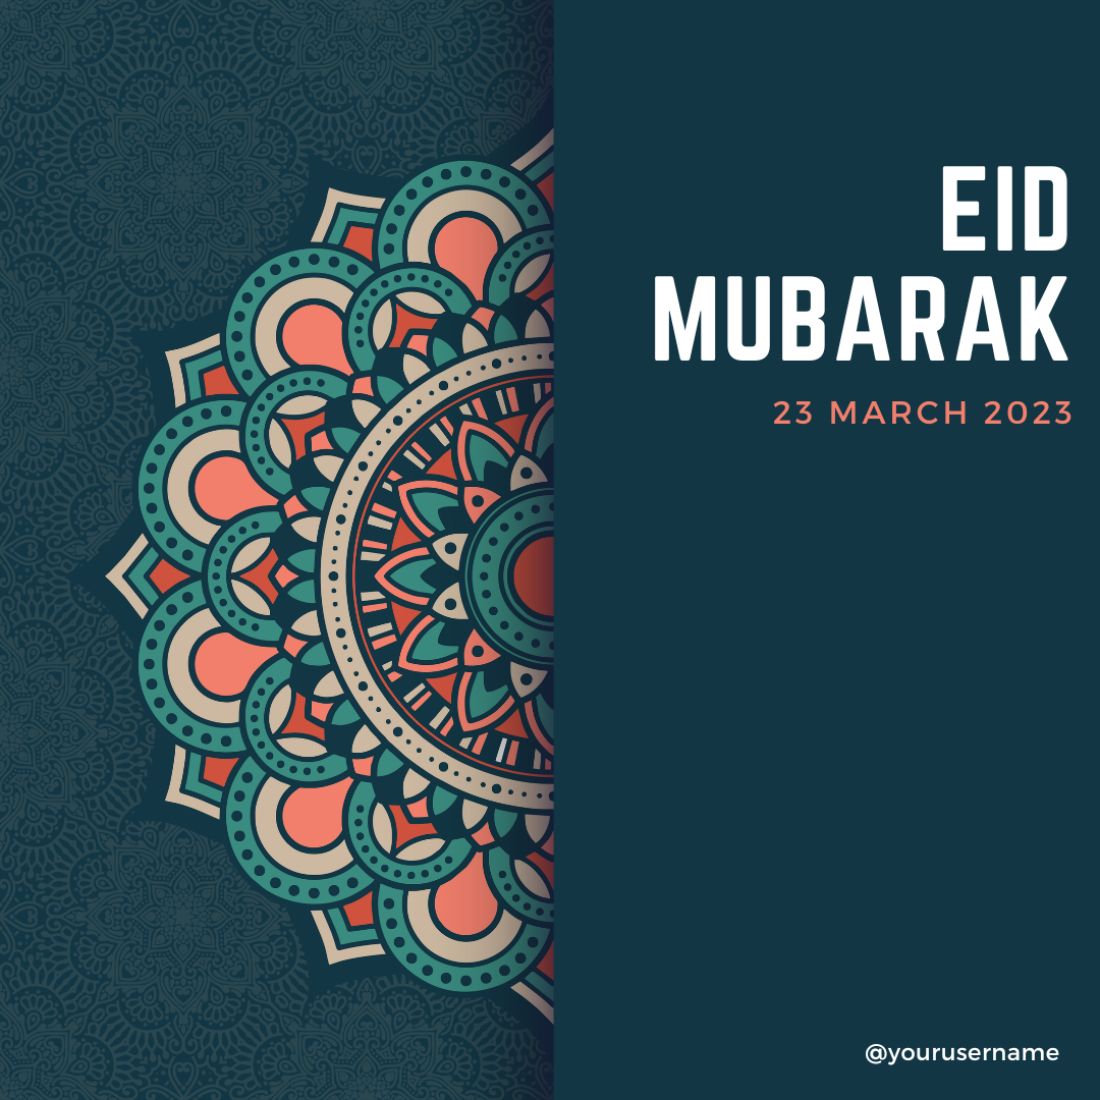 Eid Special Social Media Post Template cover image.